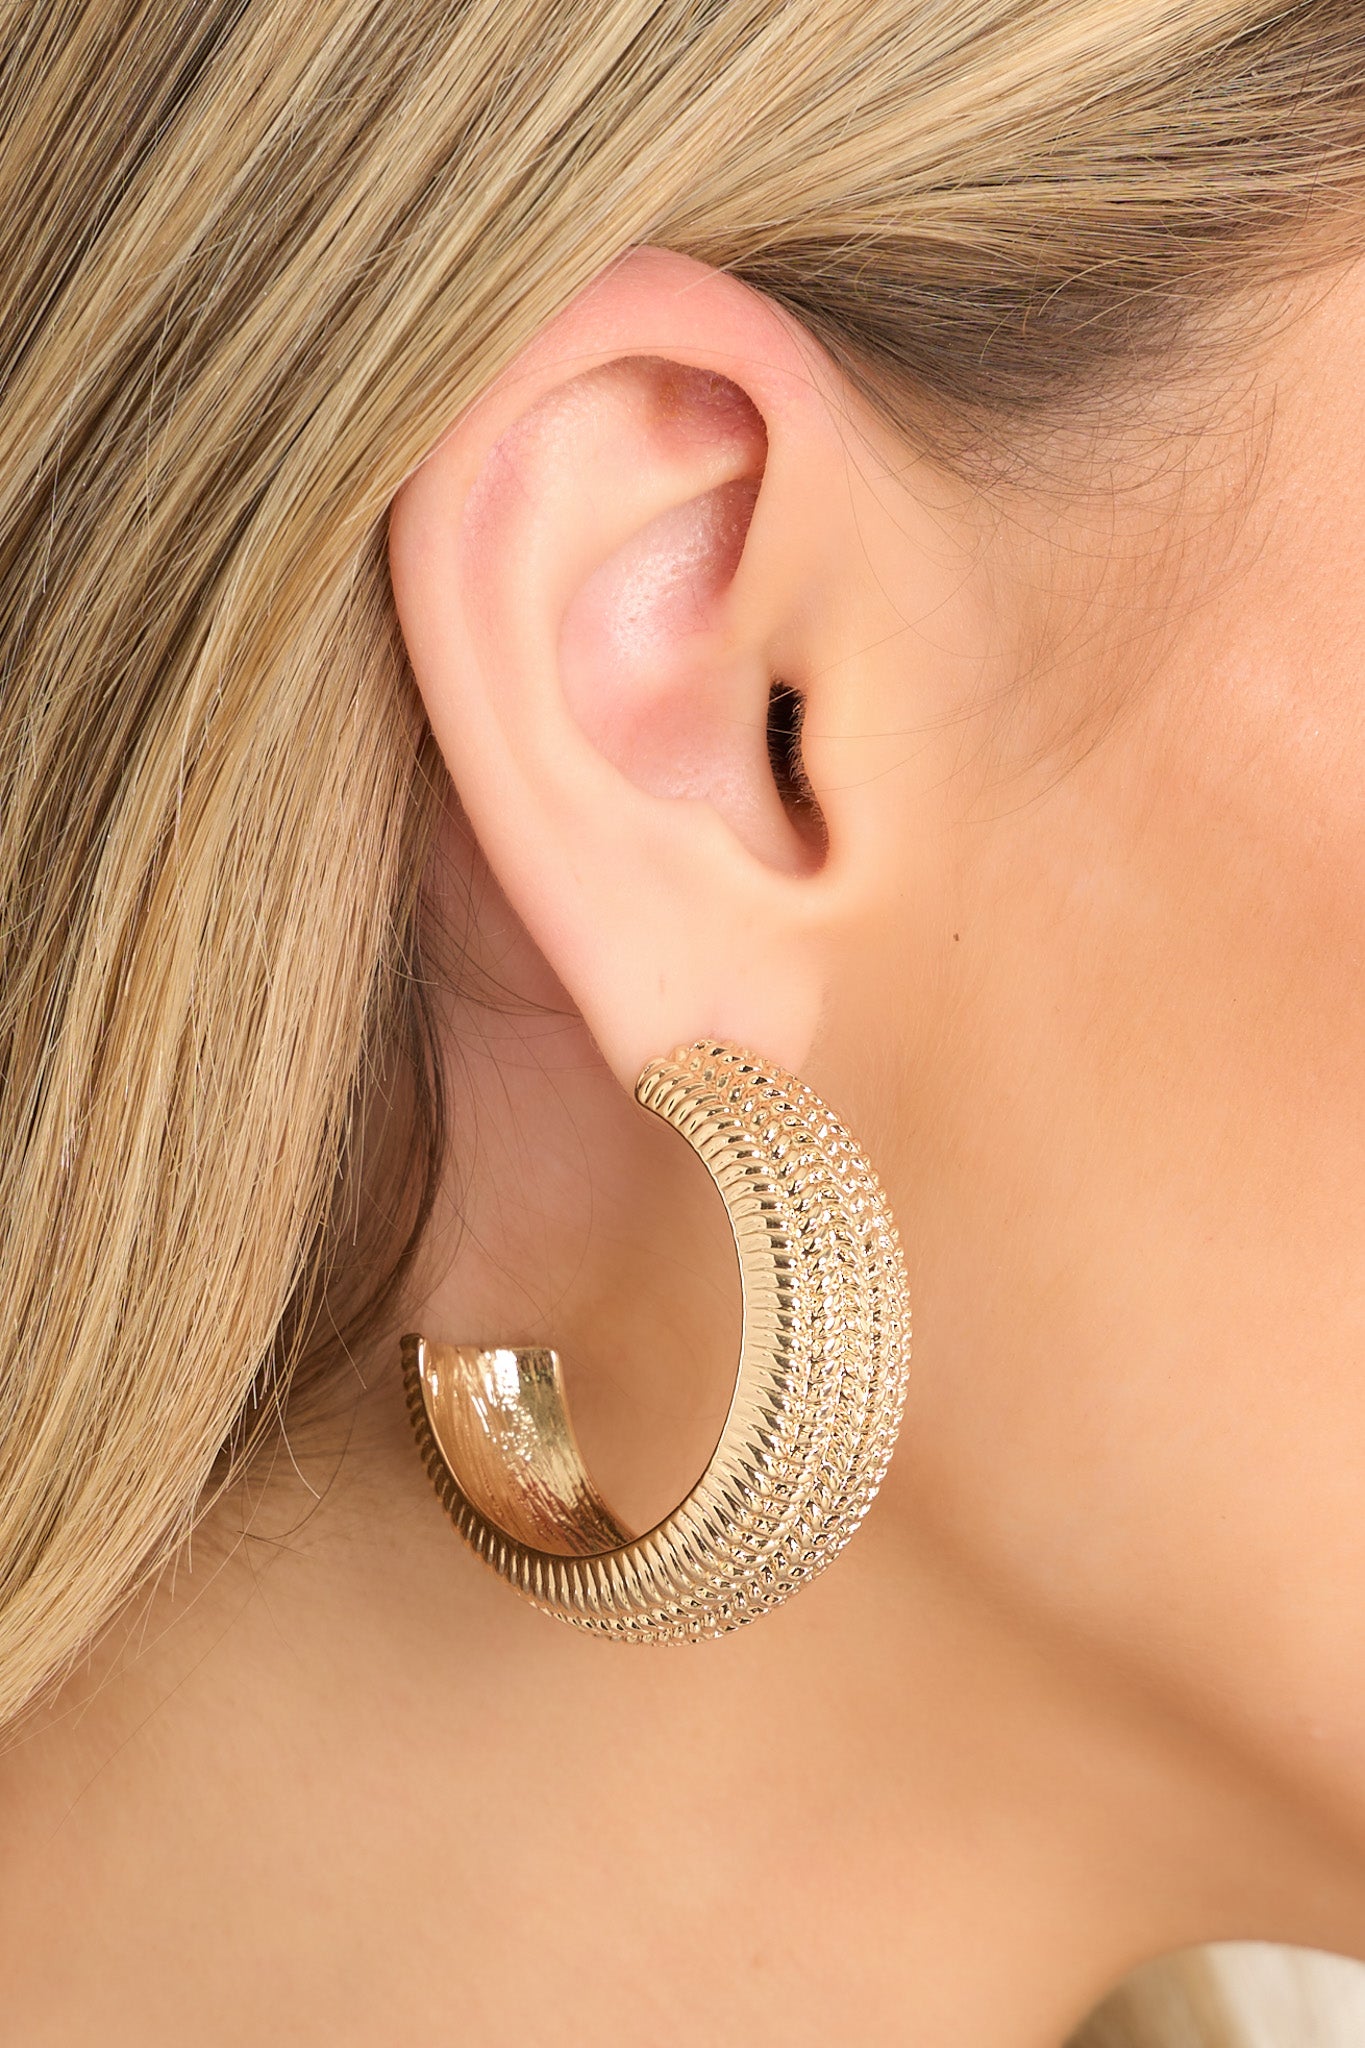 In-ear view of earrings that feature a gold textured finish, a wide hoop design, and secure post-back fastenings.